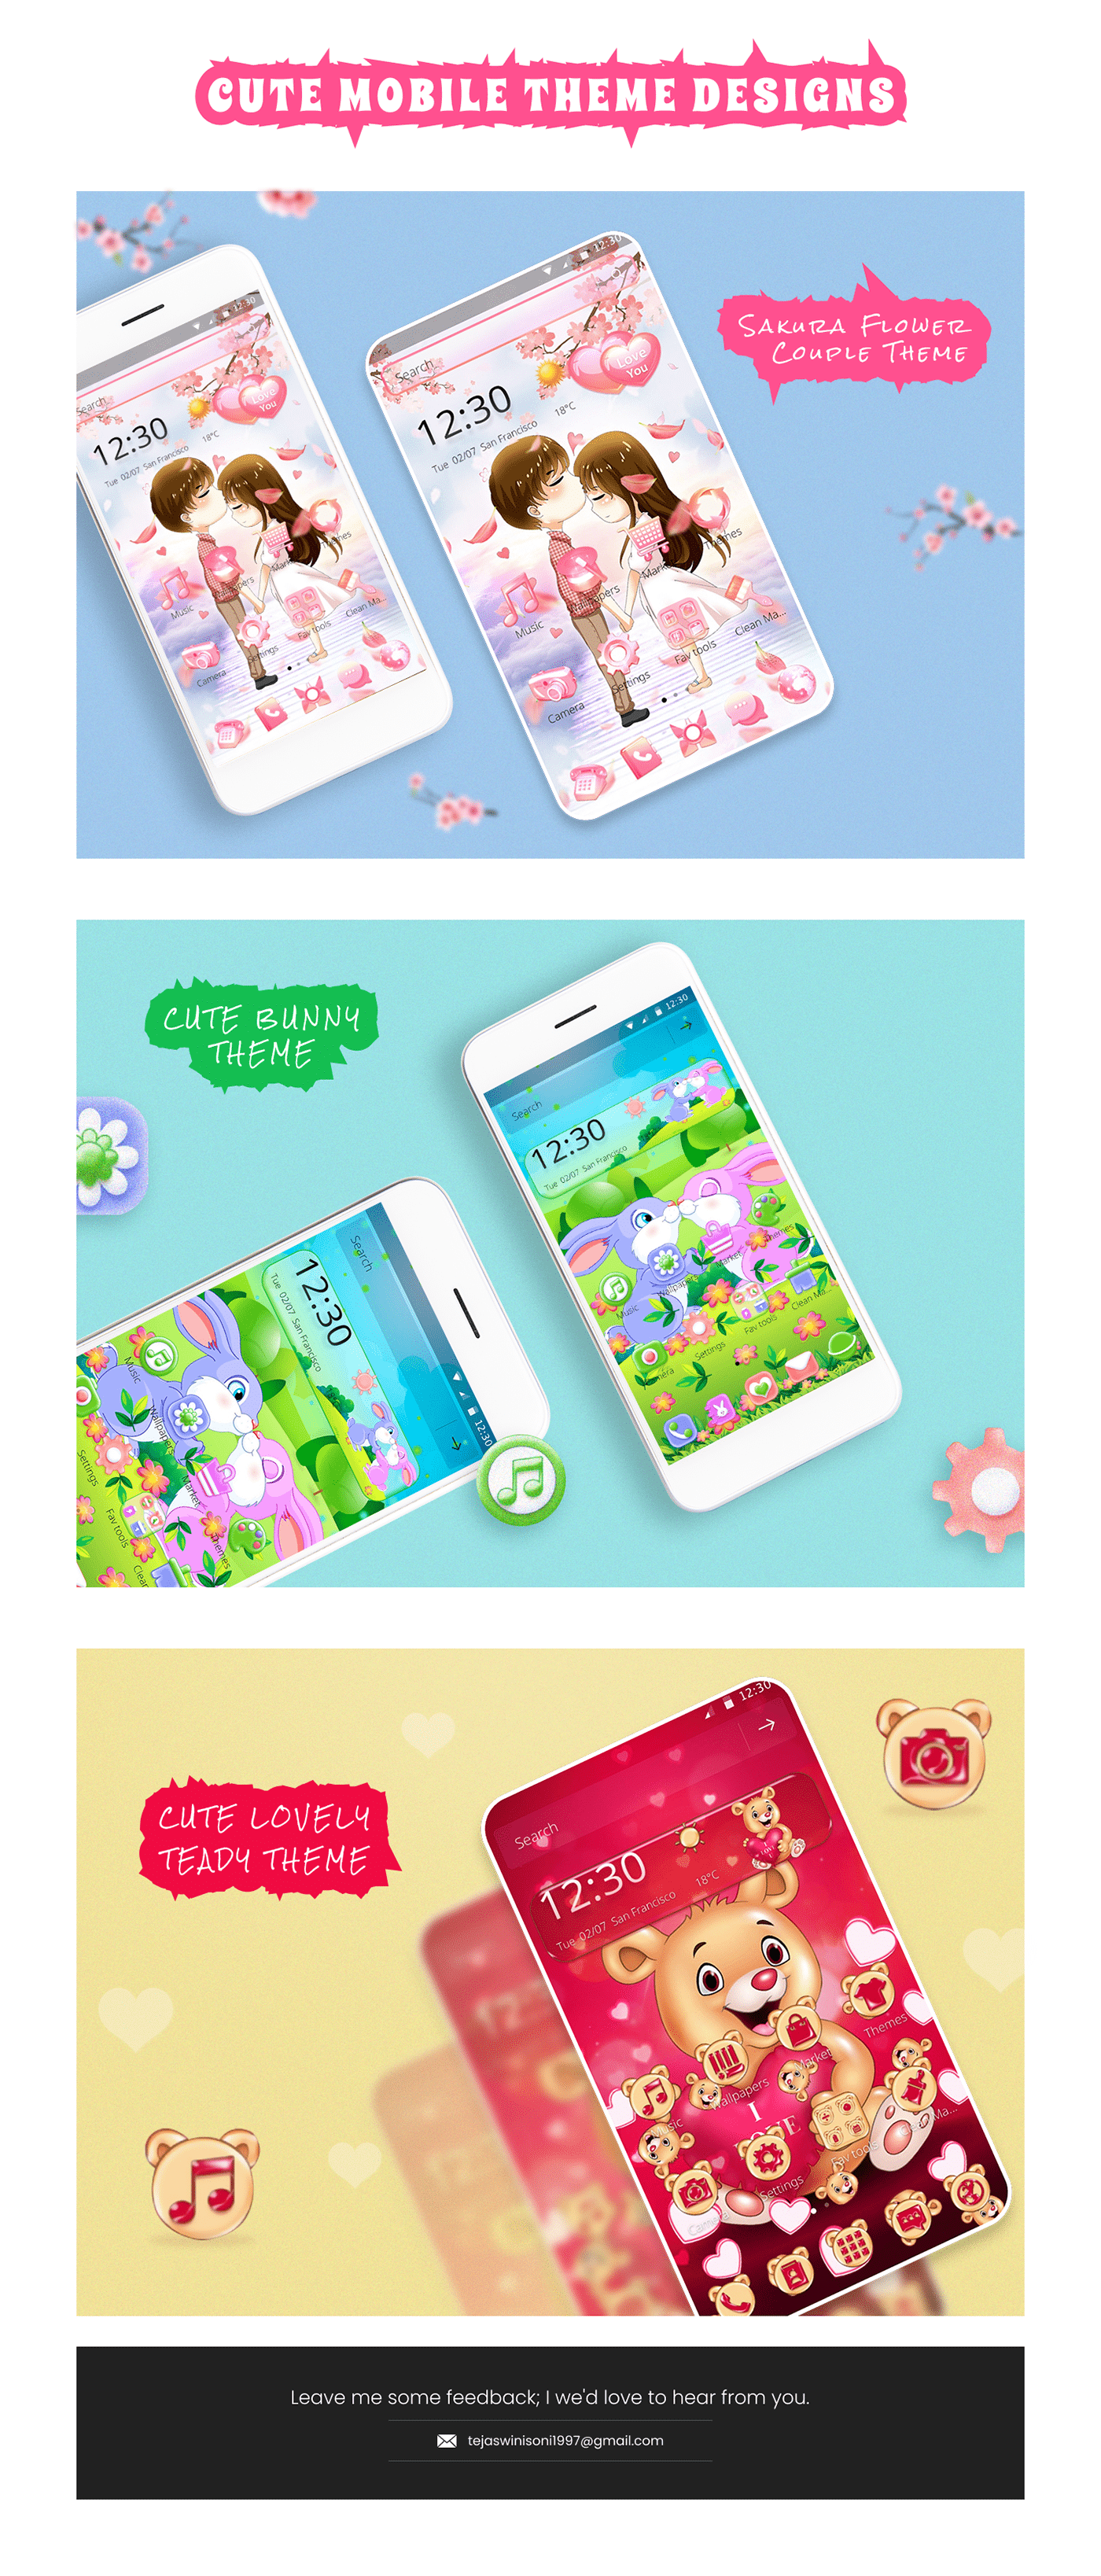 android theme cute design Flowers graphic design  mobile cute theme mobile theme sakura spring CM LAUNCHER THEME